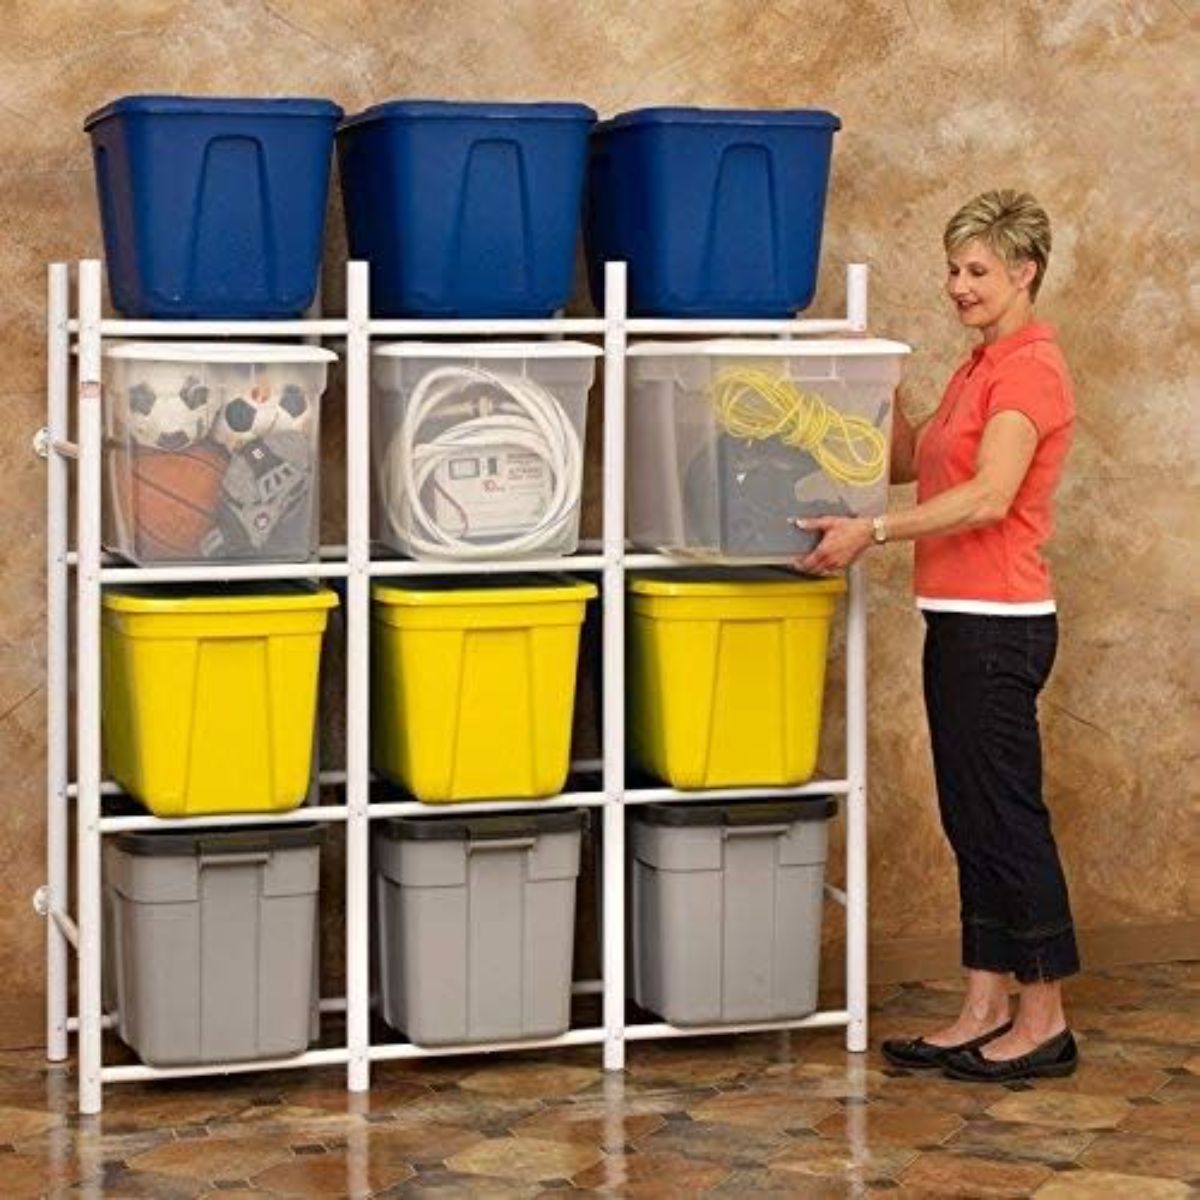 Bin Warehouse Storage Systems - 12 Totes